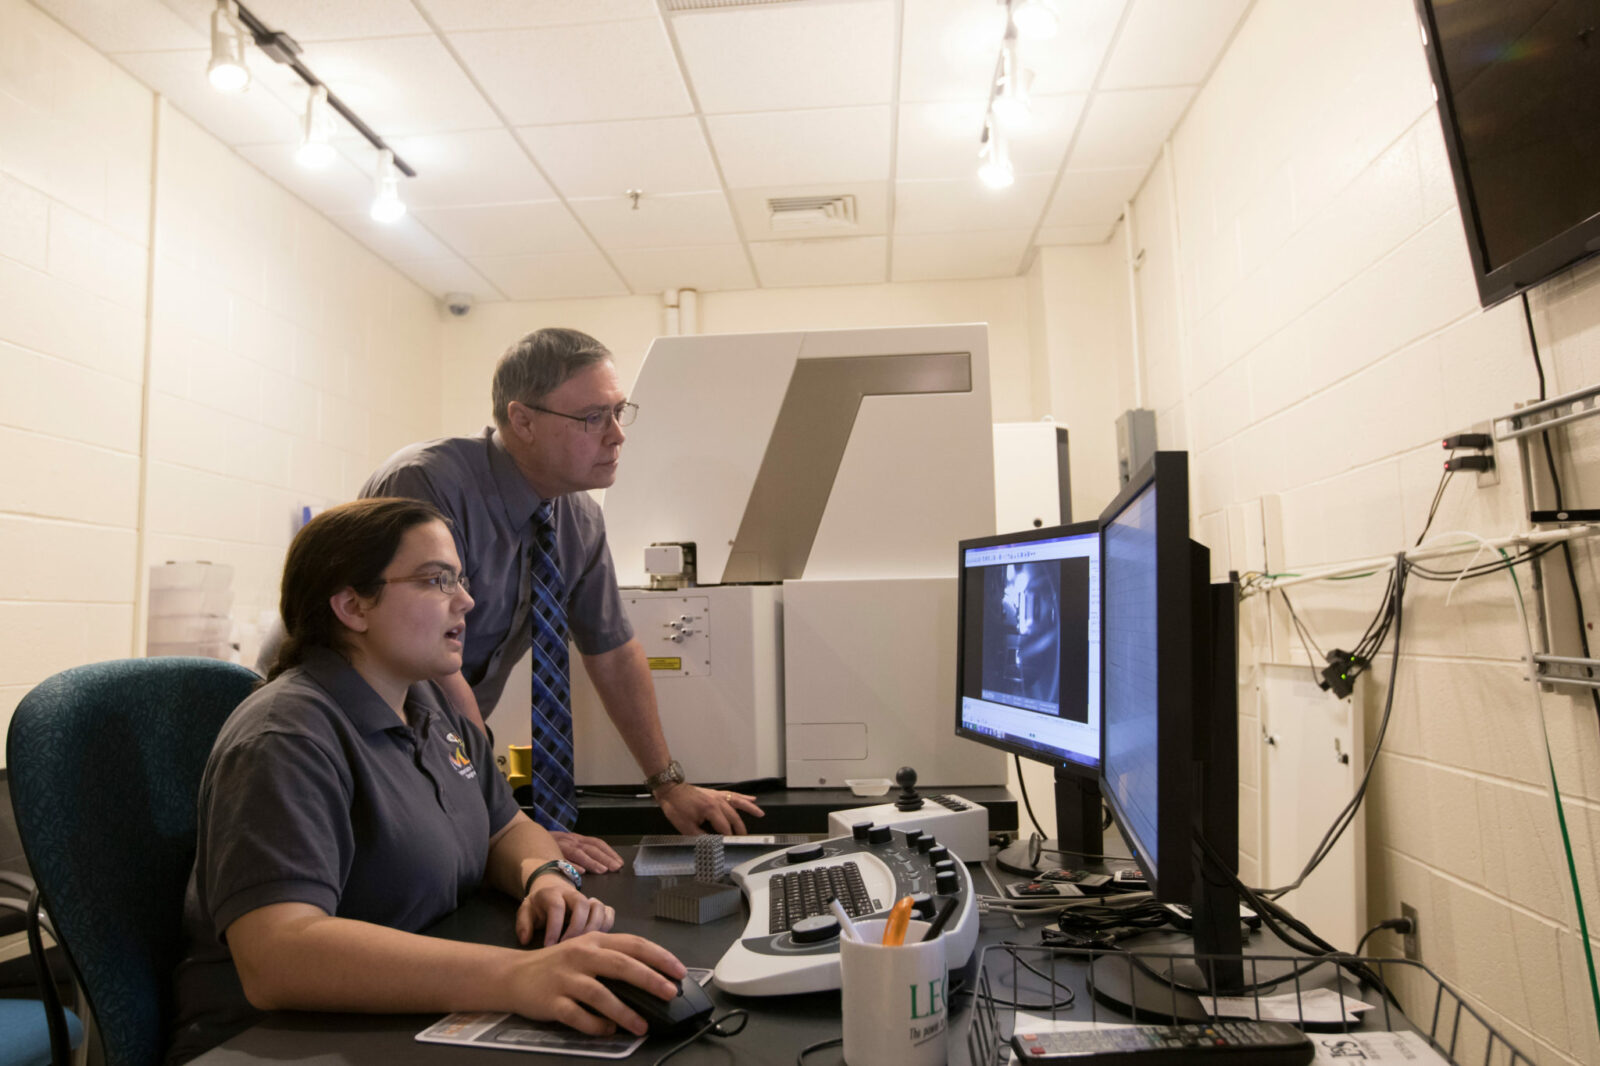 Professor Joseph Newkirk and Myranda Spratt, a Ph.D. student in materials science and engineering, examine images of a stainless steel allow designed to be lighter than conventional alloys. Sam O'Keefe/Missouri S&T